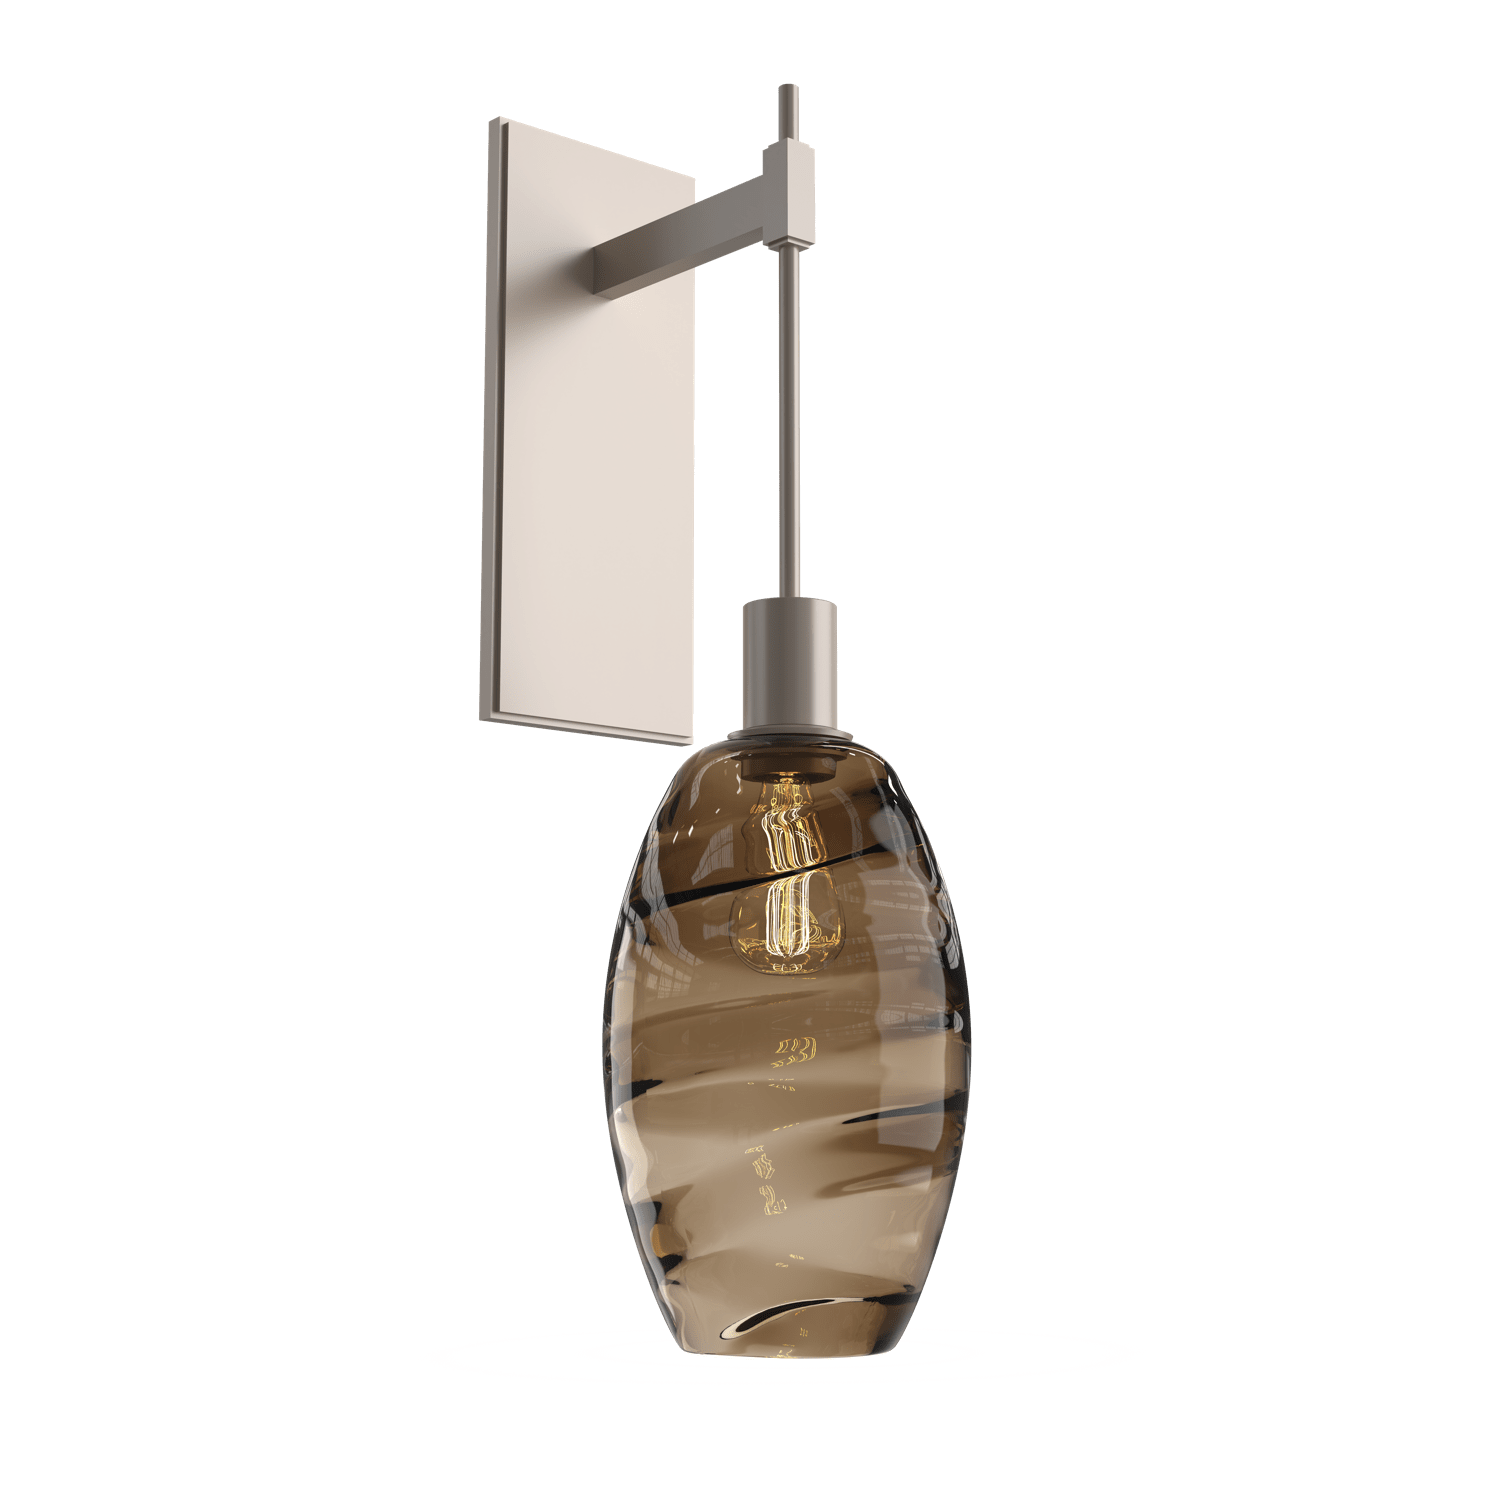 IDB0035-24-BS-OB-Hammerton-Studio-Optic-Blown-Glass-Elisse-tempo-wall-sconce-with-metallic-beige-silver-finish-and-optic-bronze-blown-glass-shades-and-incandescent-lamping